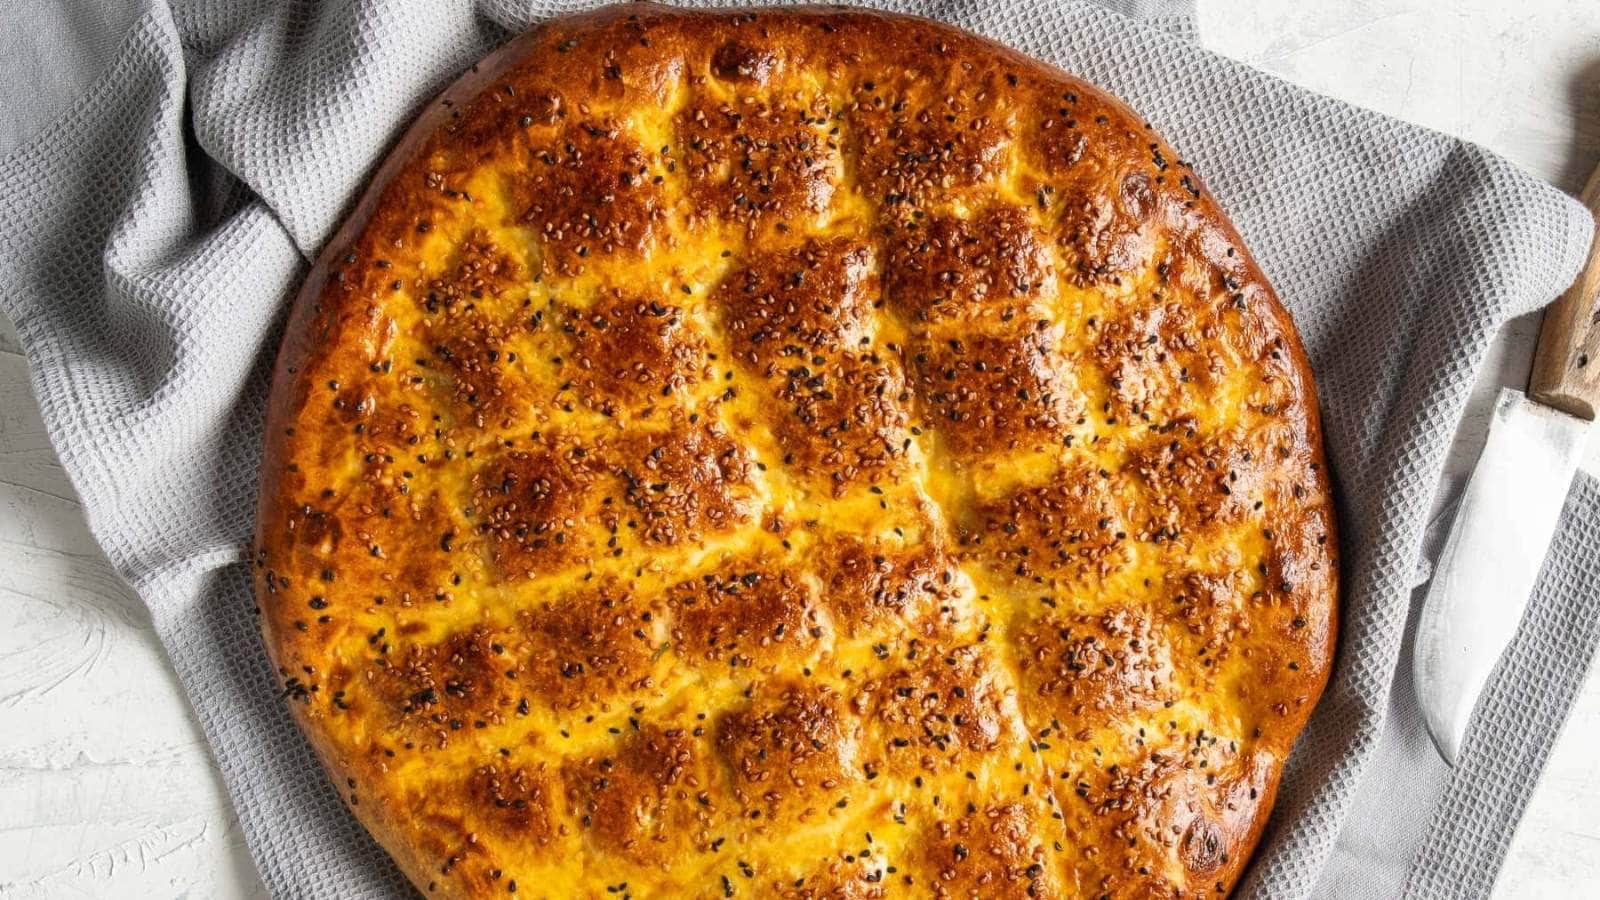 Turkish Pide Bread recipe by Give Recipe.